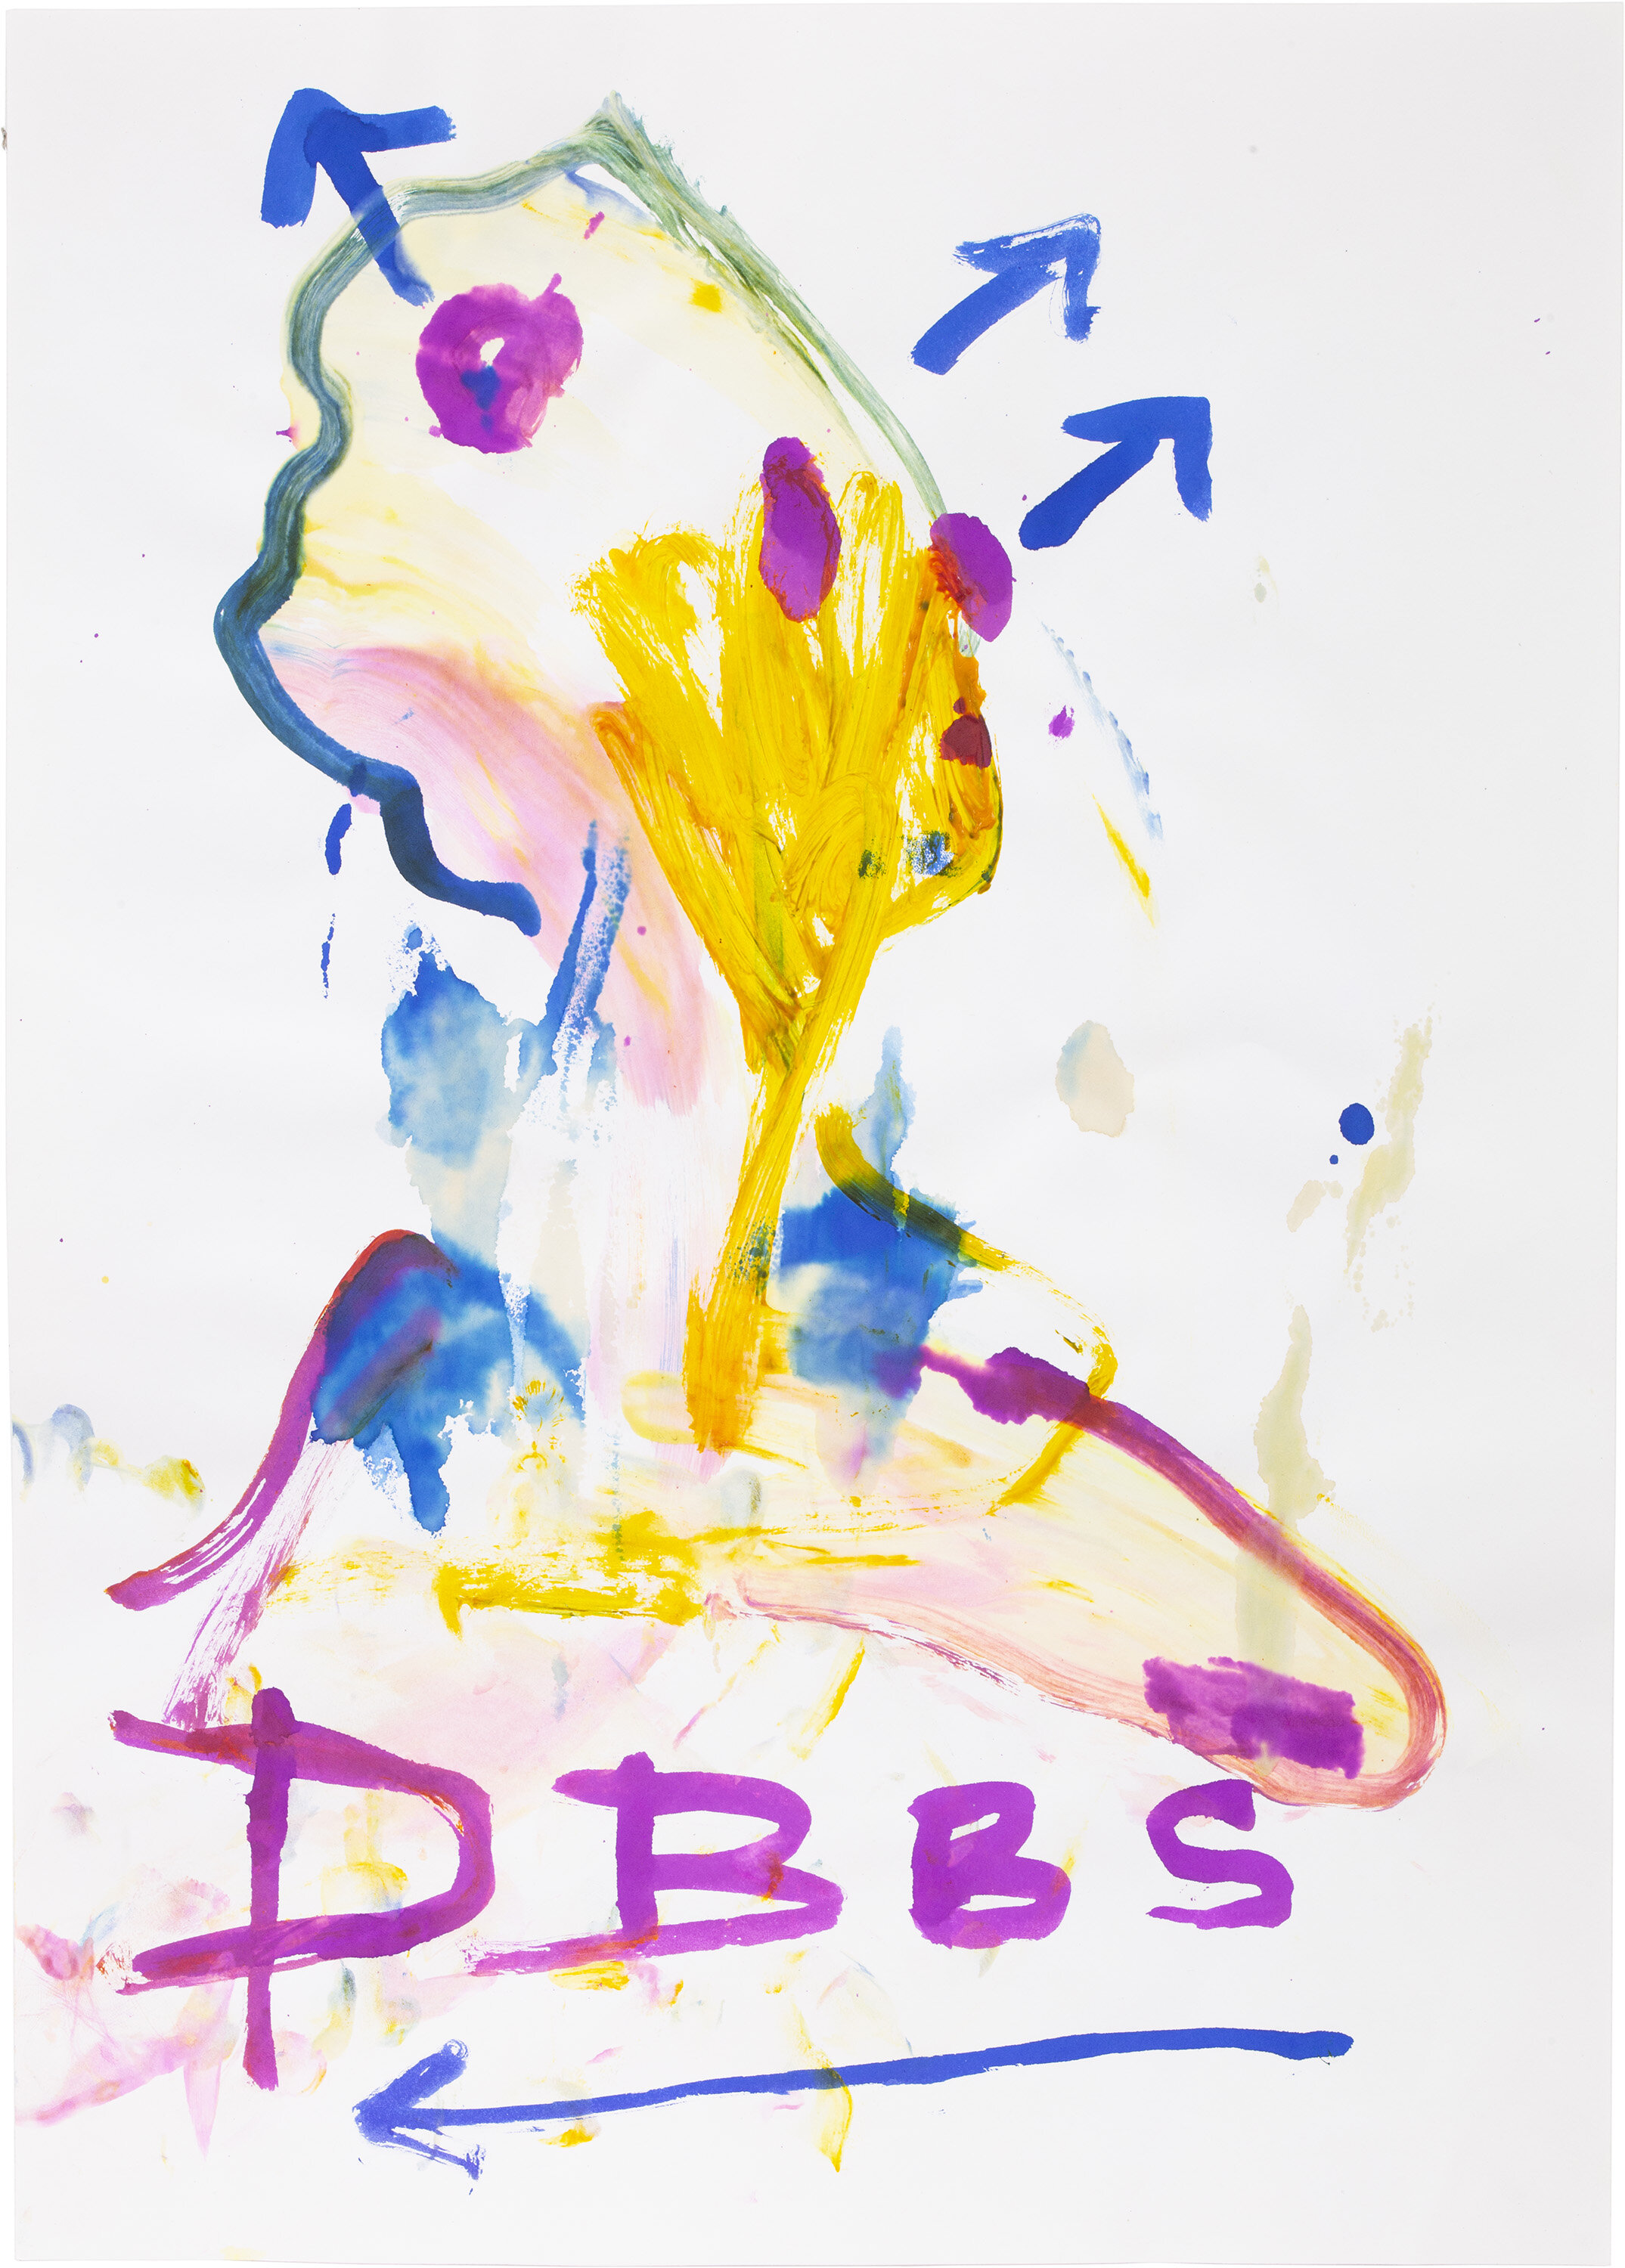  Drew Beattie and Ben Shepard   DBBS-DRW-2019-129   2019  acrylic and ink on paper 24 x 18 inches 